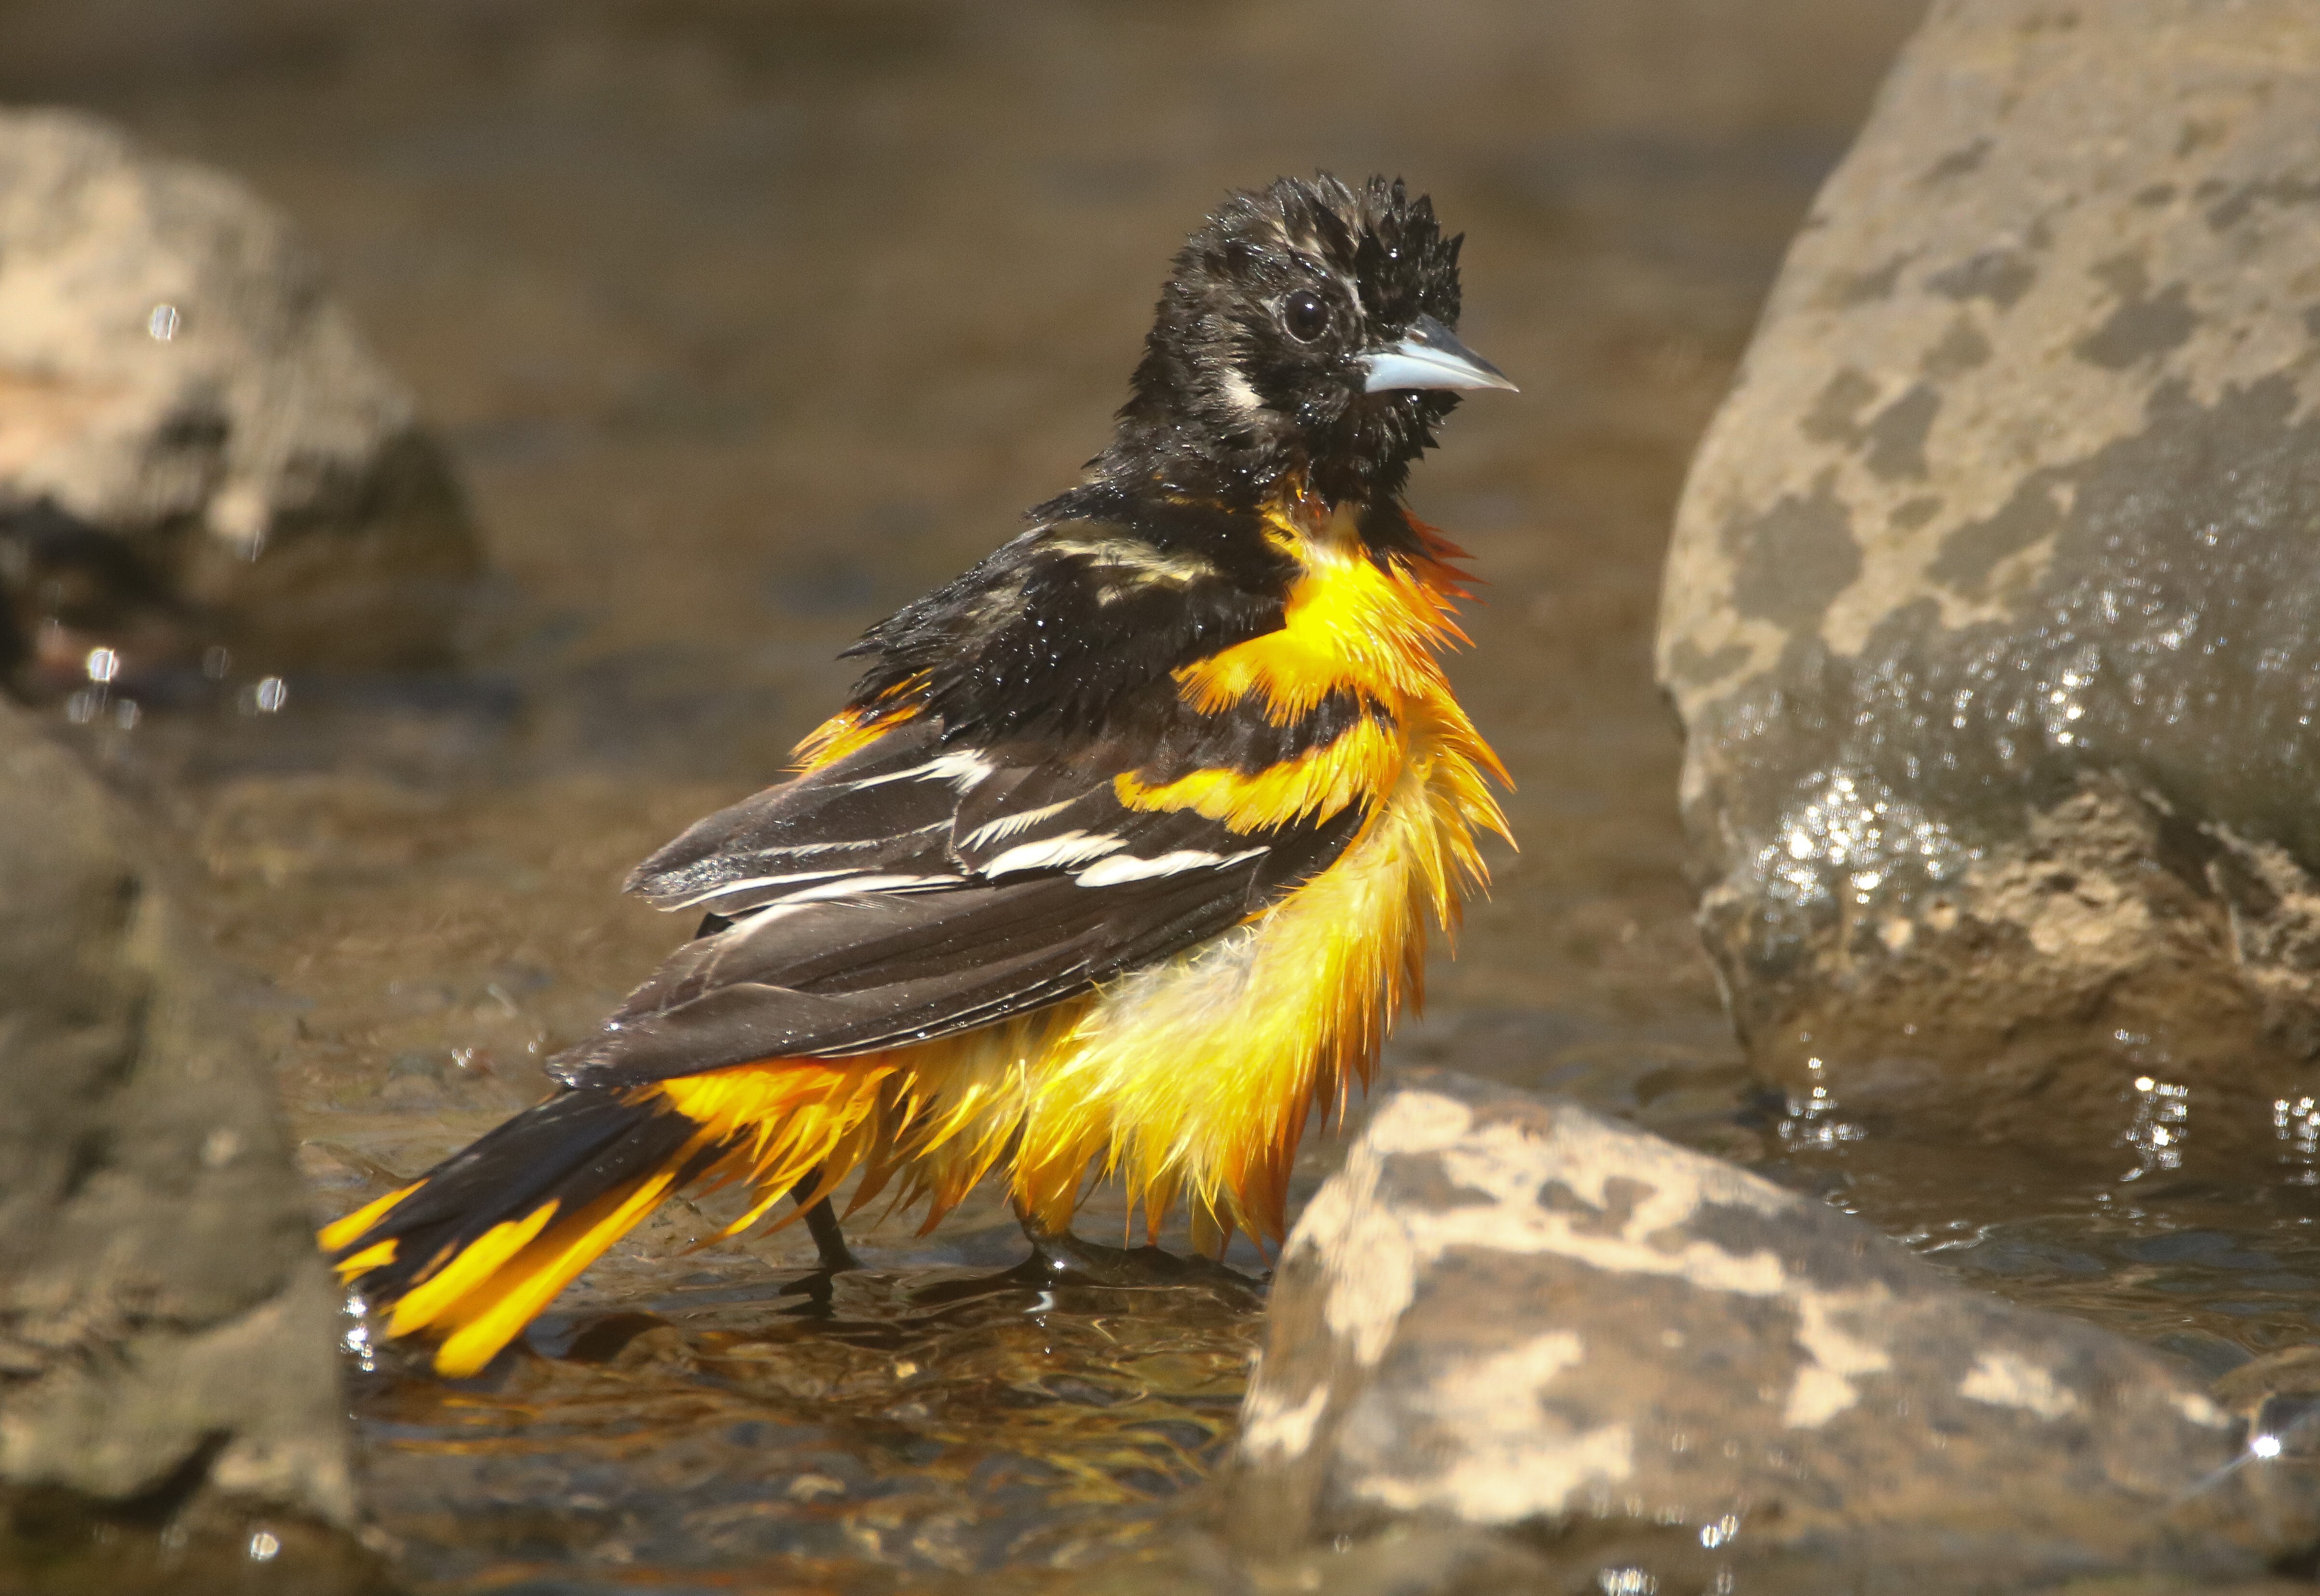 A male Baltimore Oriole bathes in Clove Lakes Park. Photo: <a href="https://www.flickr.com/photos/89780664@N05/" target="_blank">Dave Ostapiuk</a>